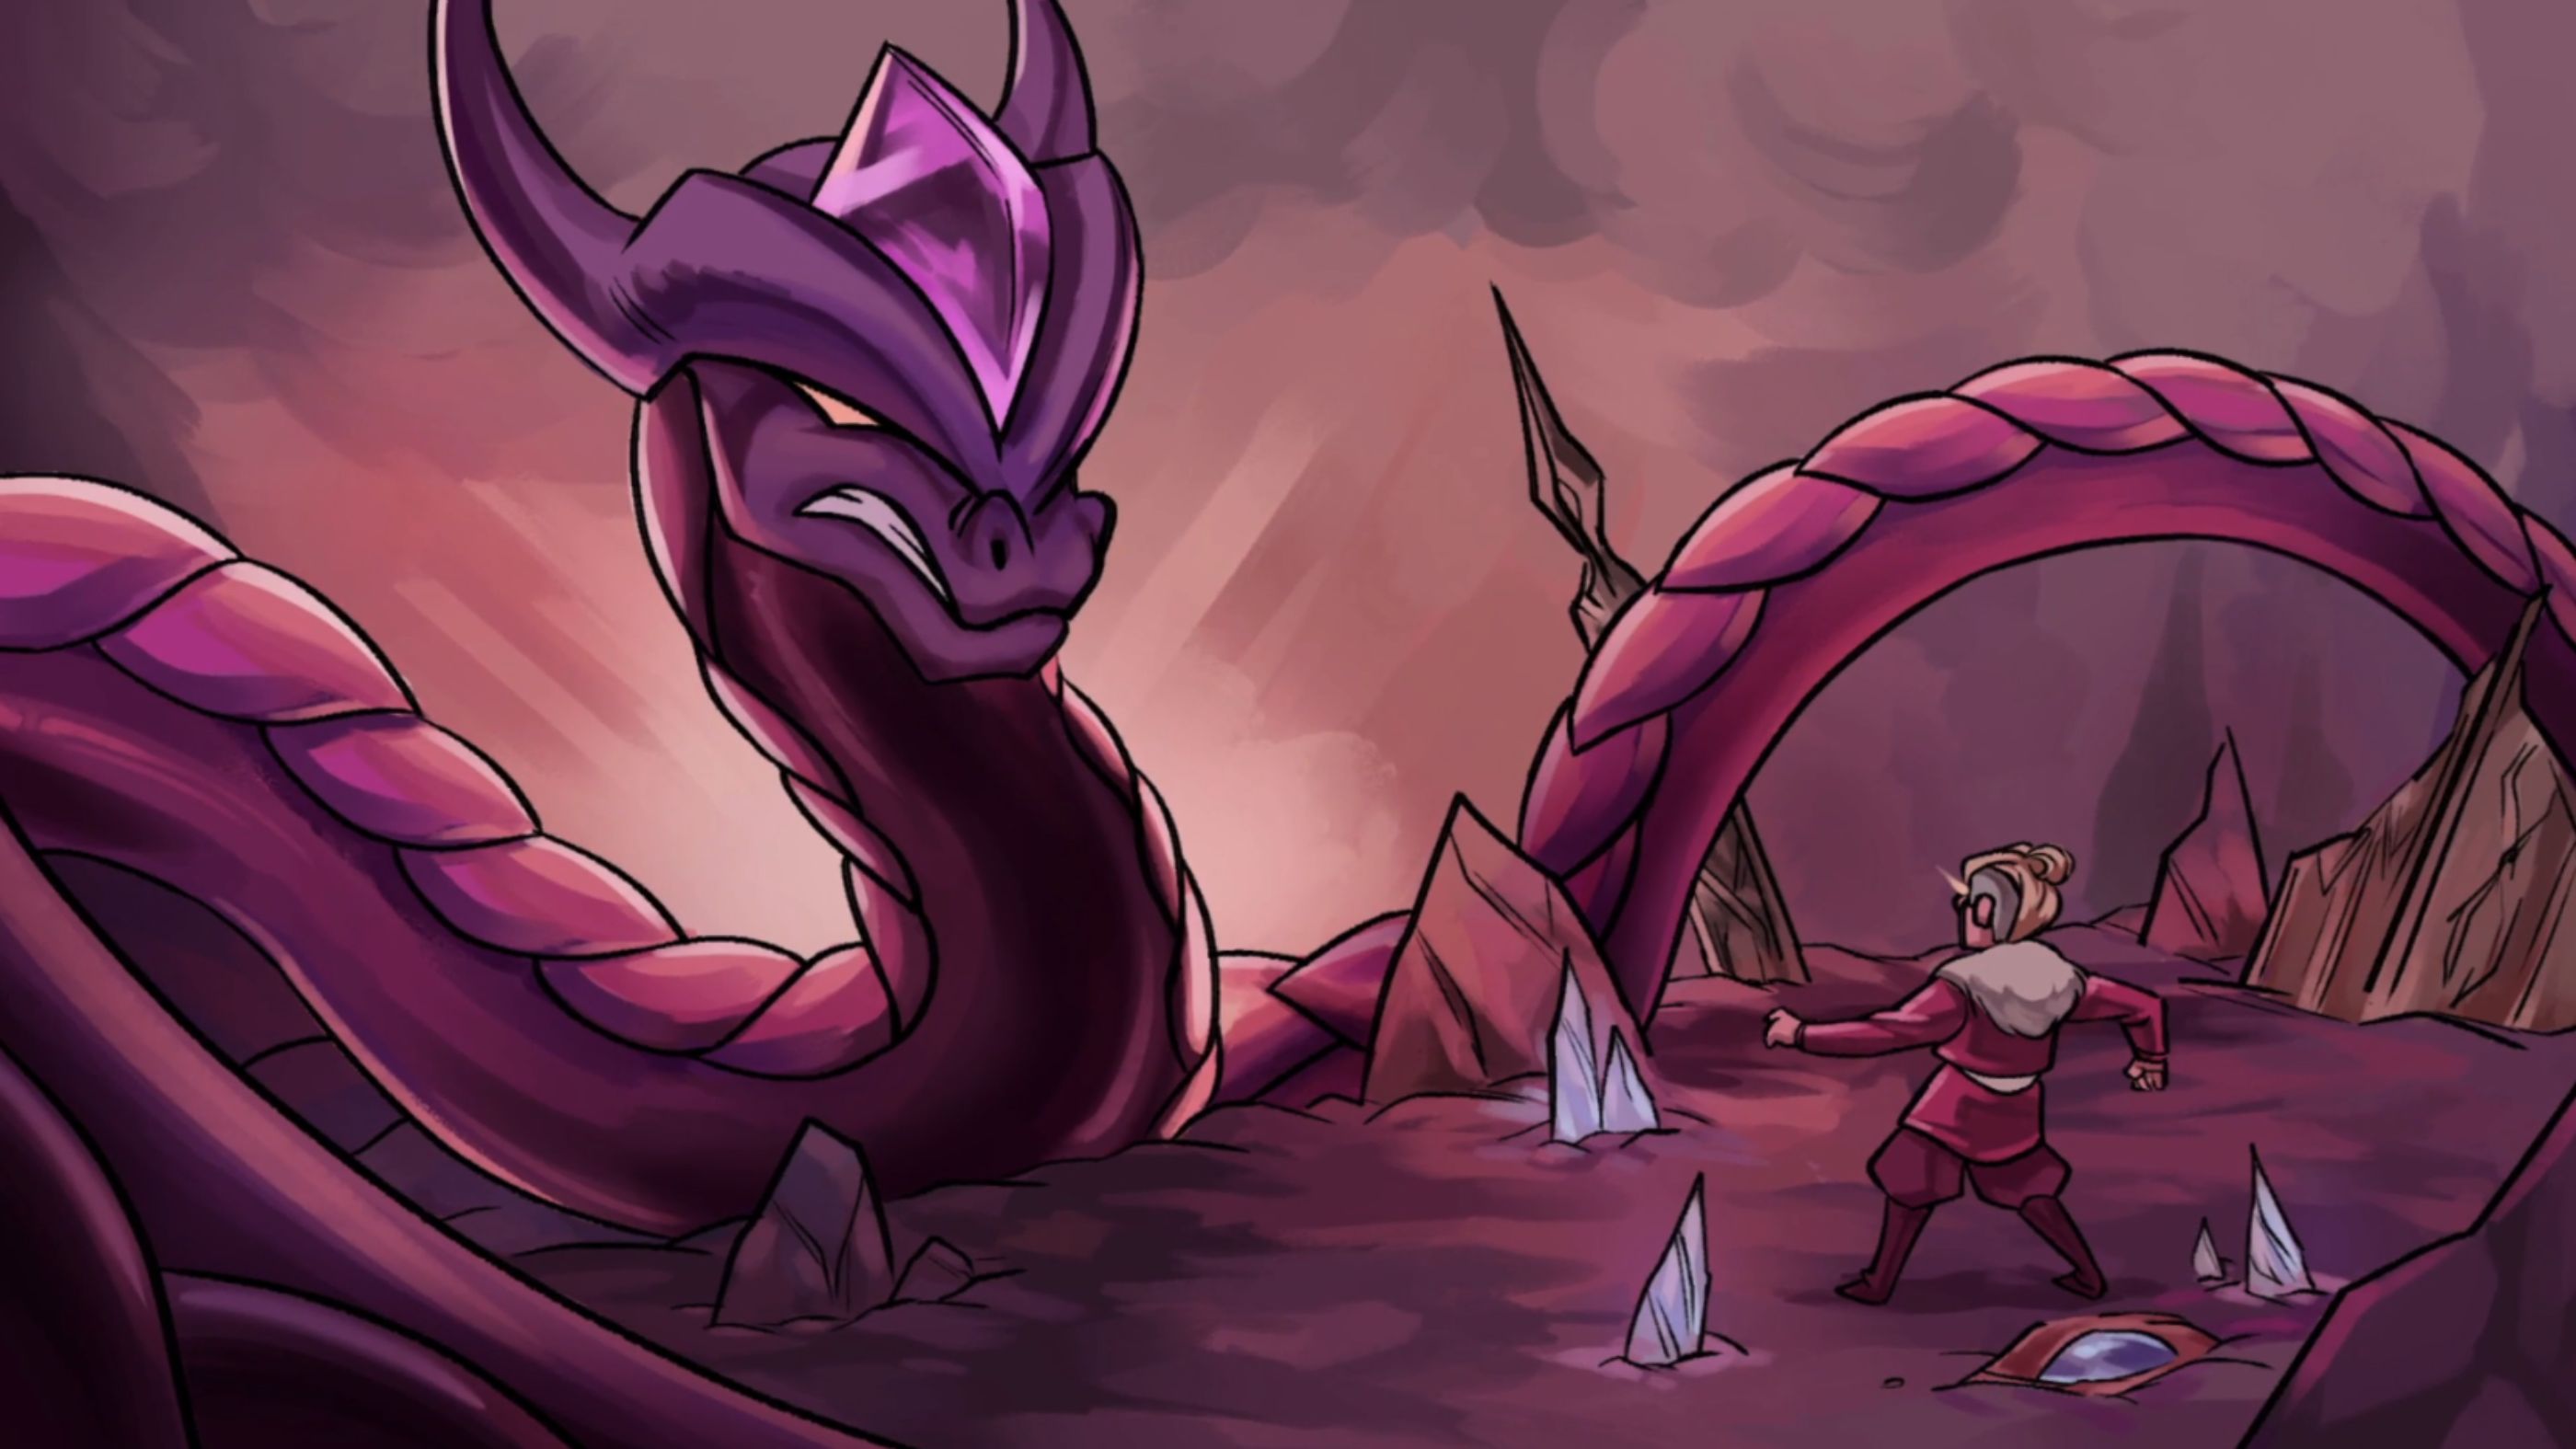 A large dragon appears in front of an adventurer in a cave.